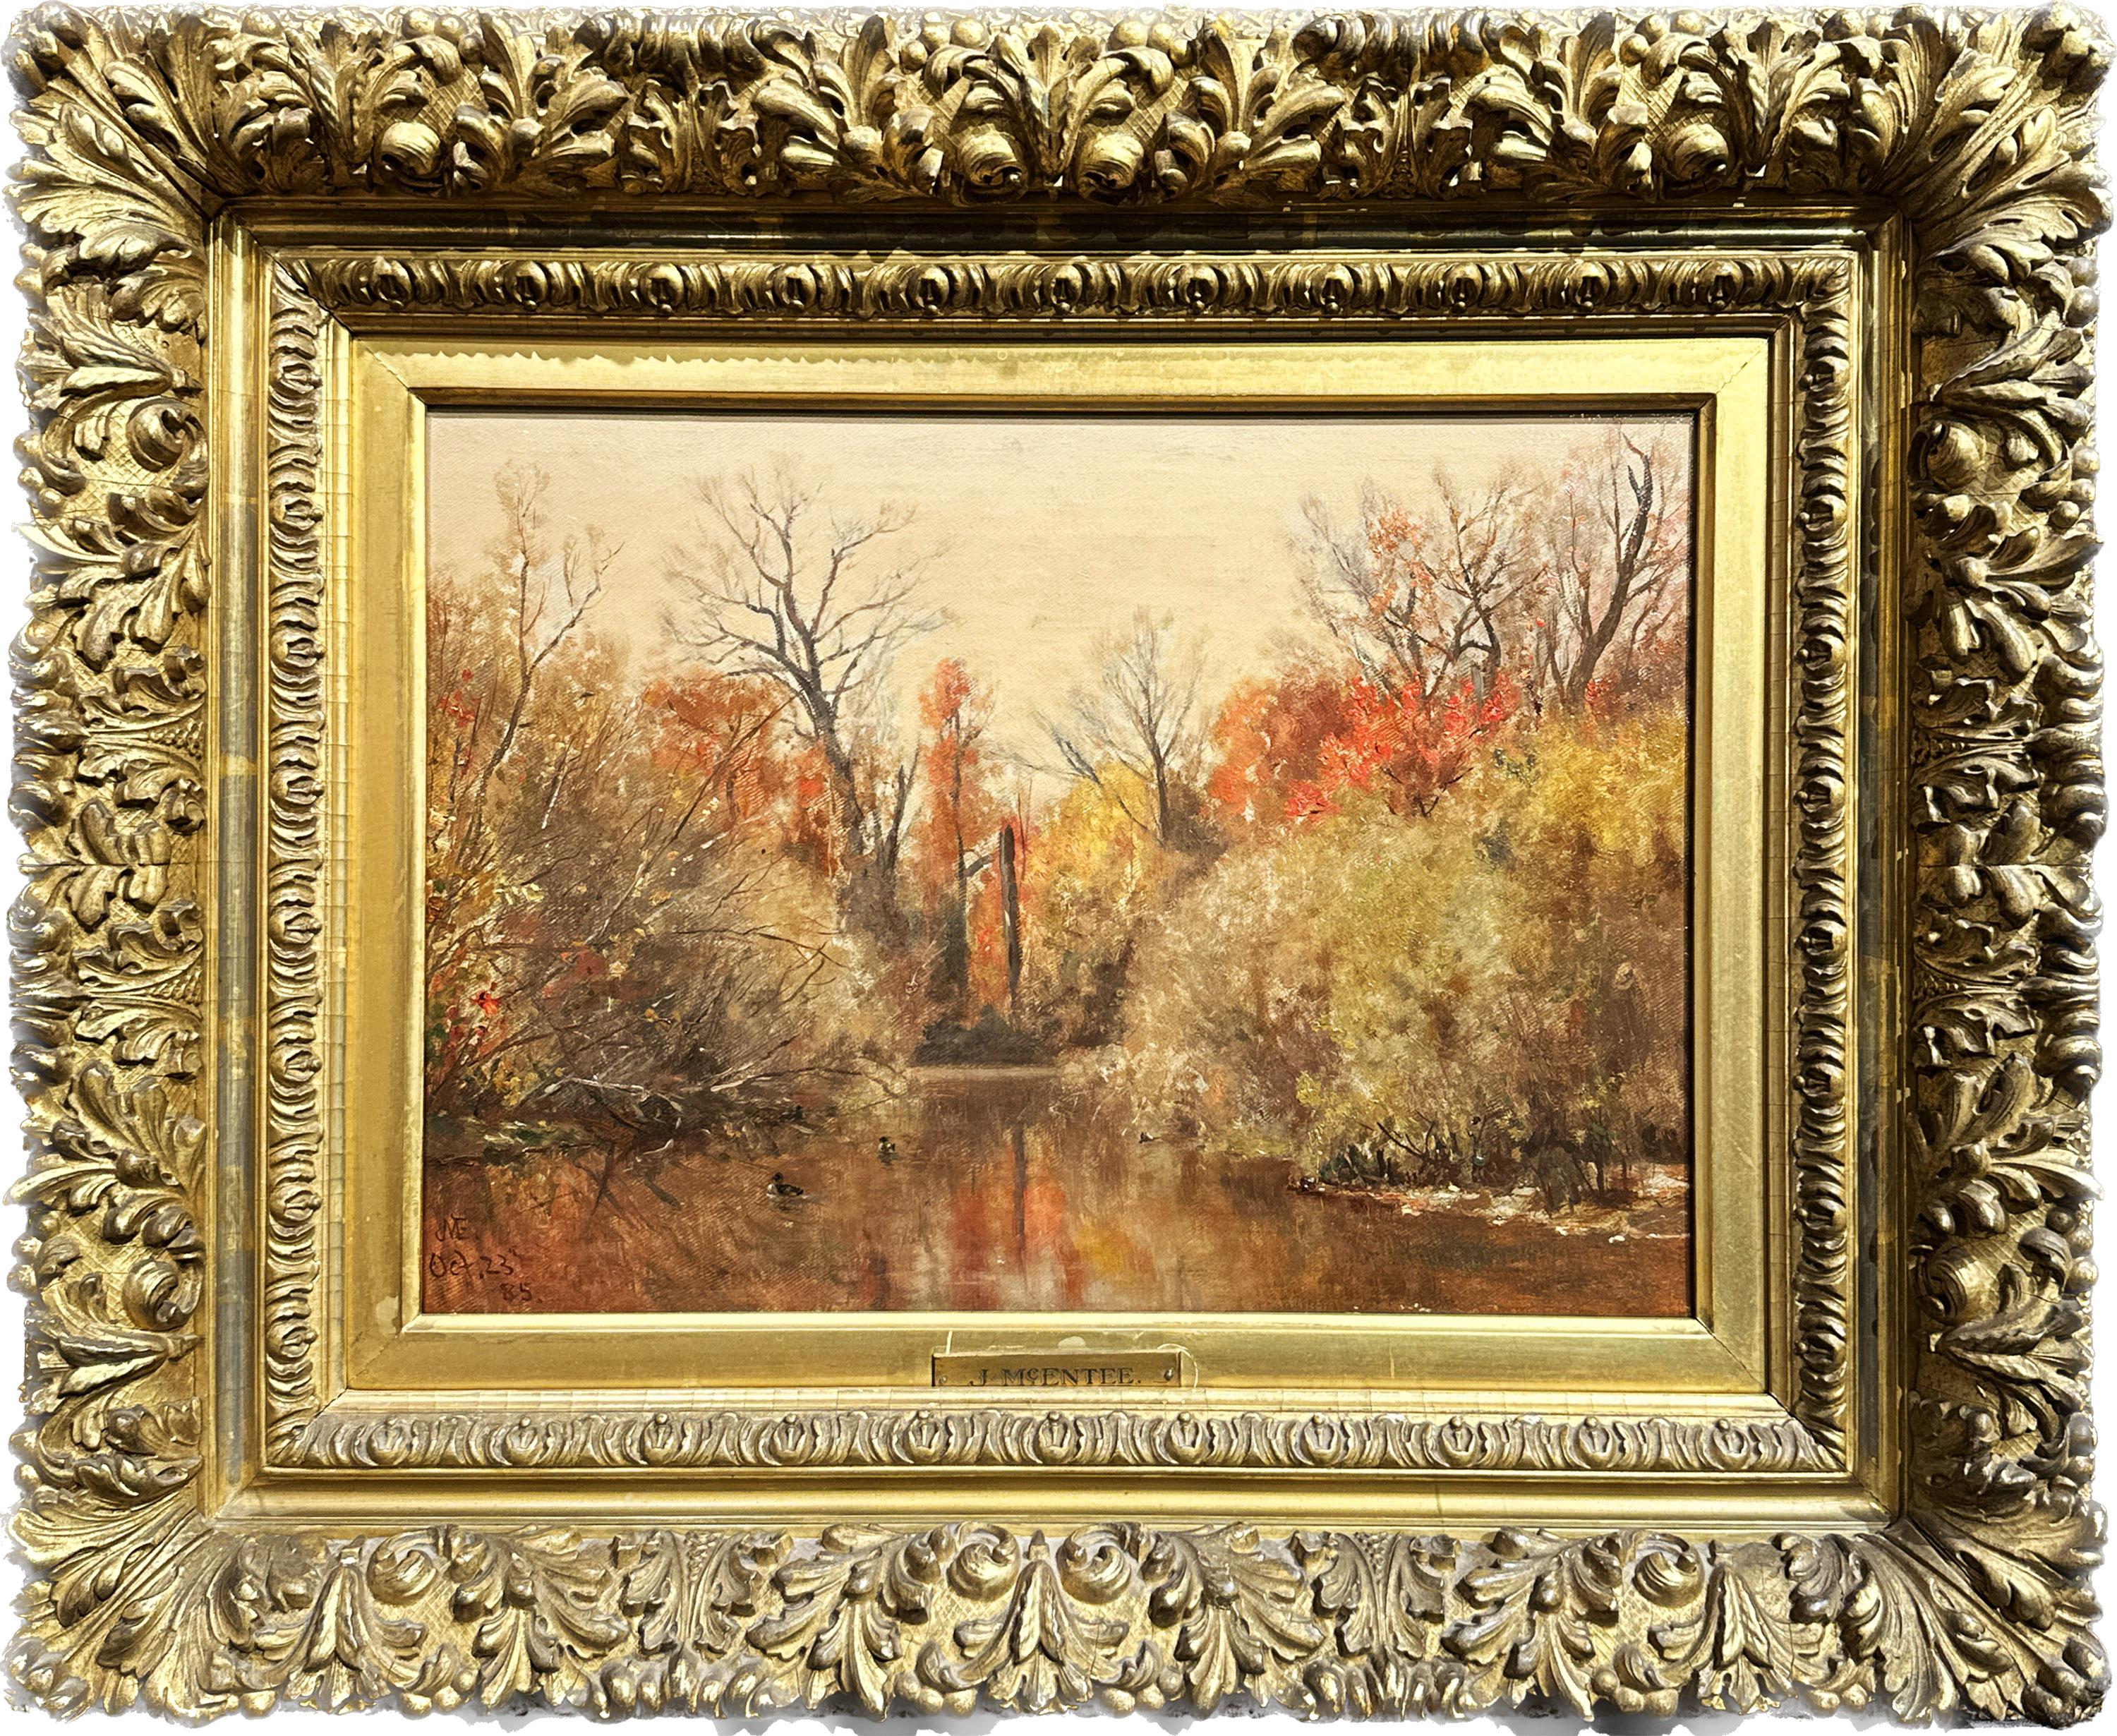 Autumn Idle, Catskills, New York, October 23, 1885 - Painting by Jervis McEntee